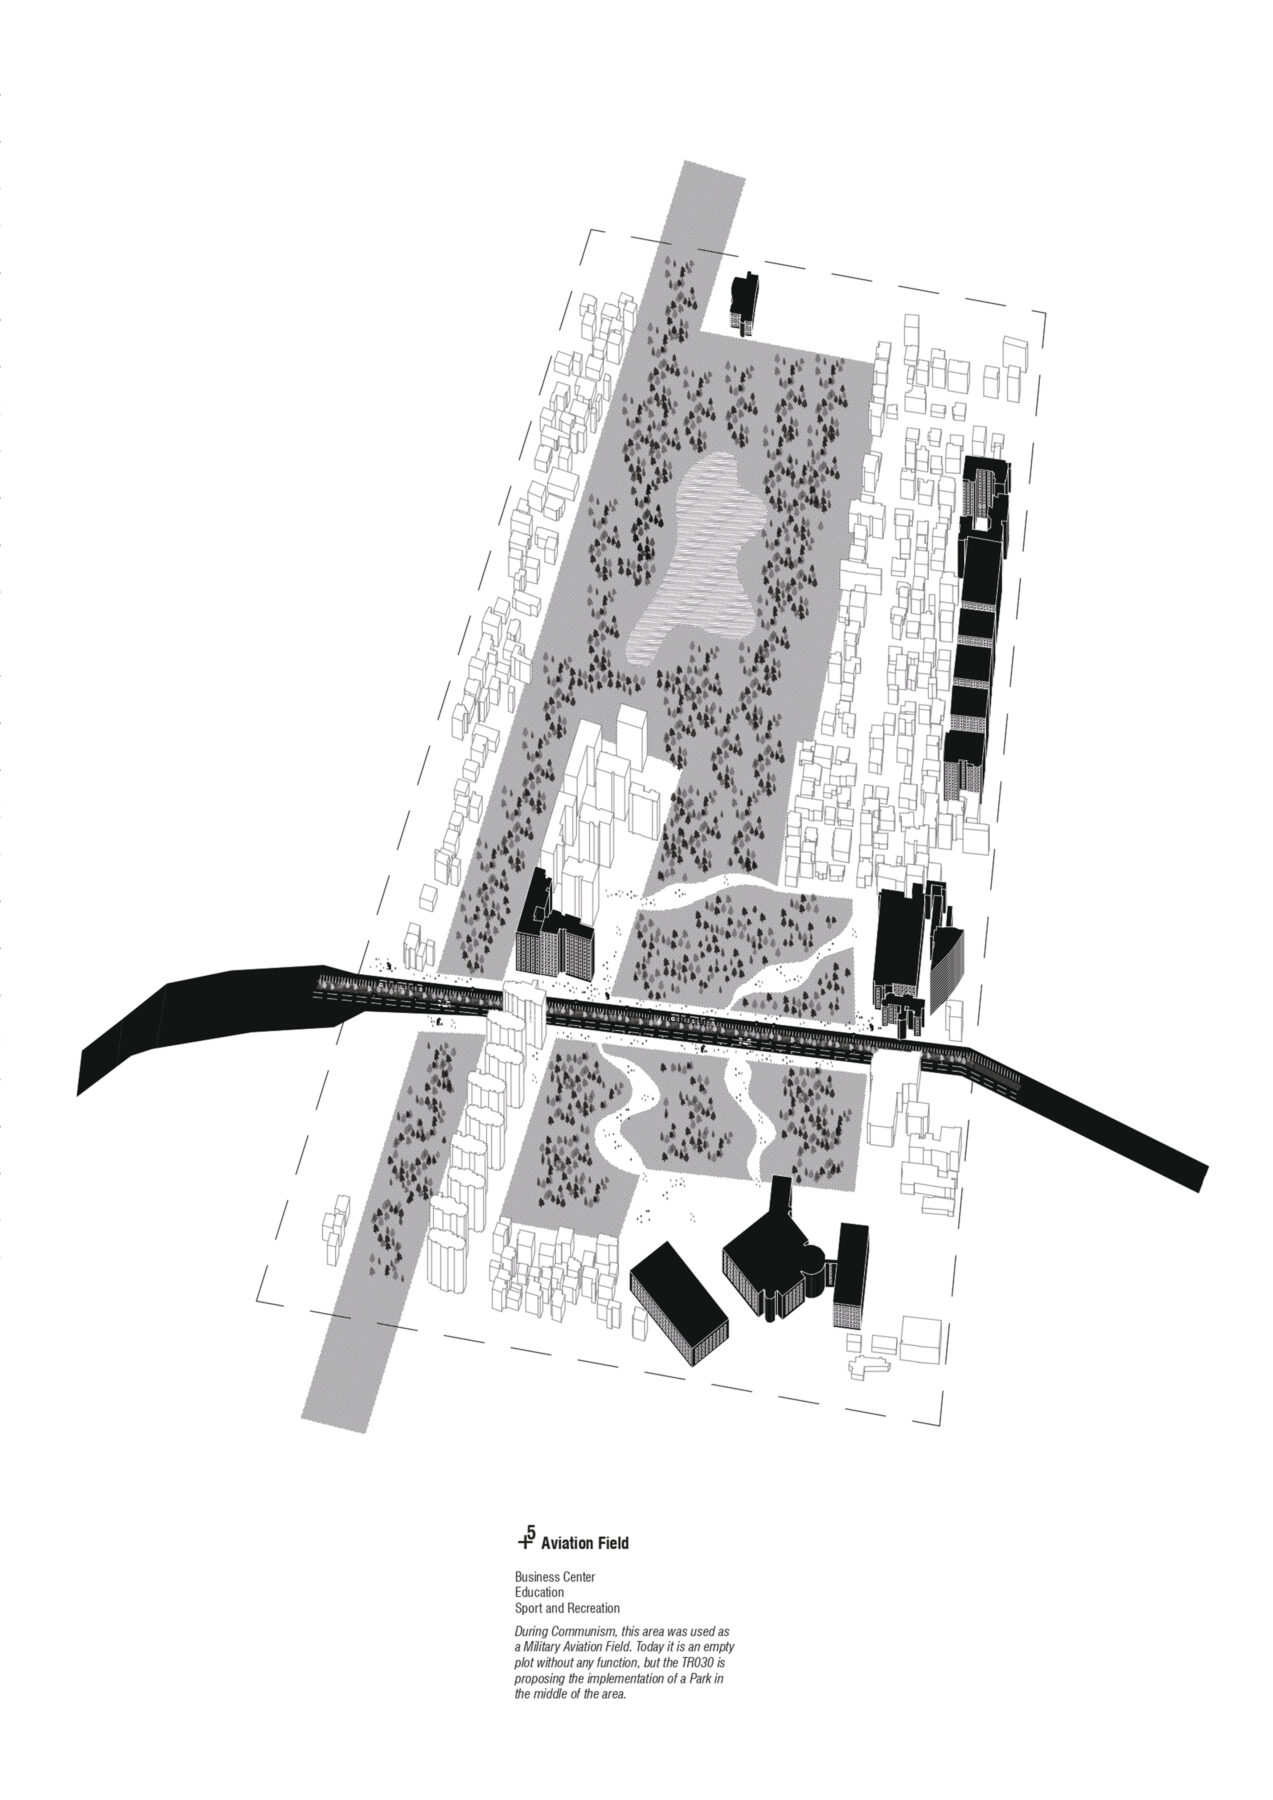 Archisearch The city as campus: Tirana030 | Diploma thesis project by Elvin Demiri